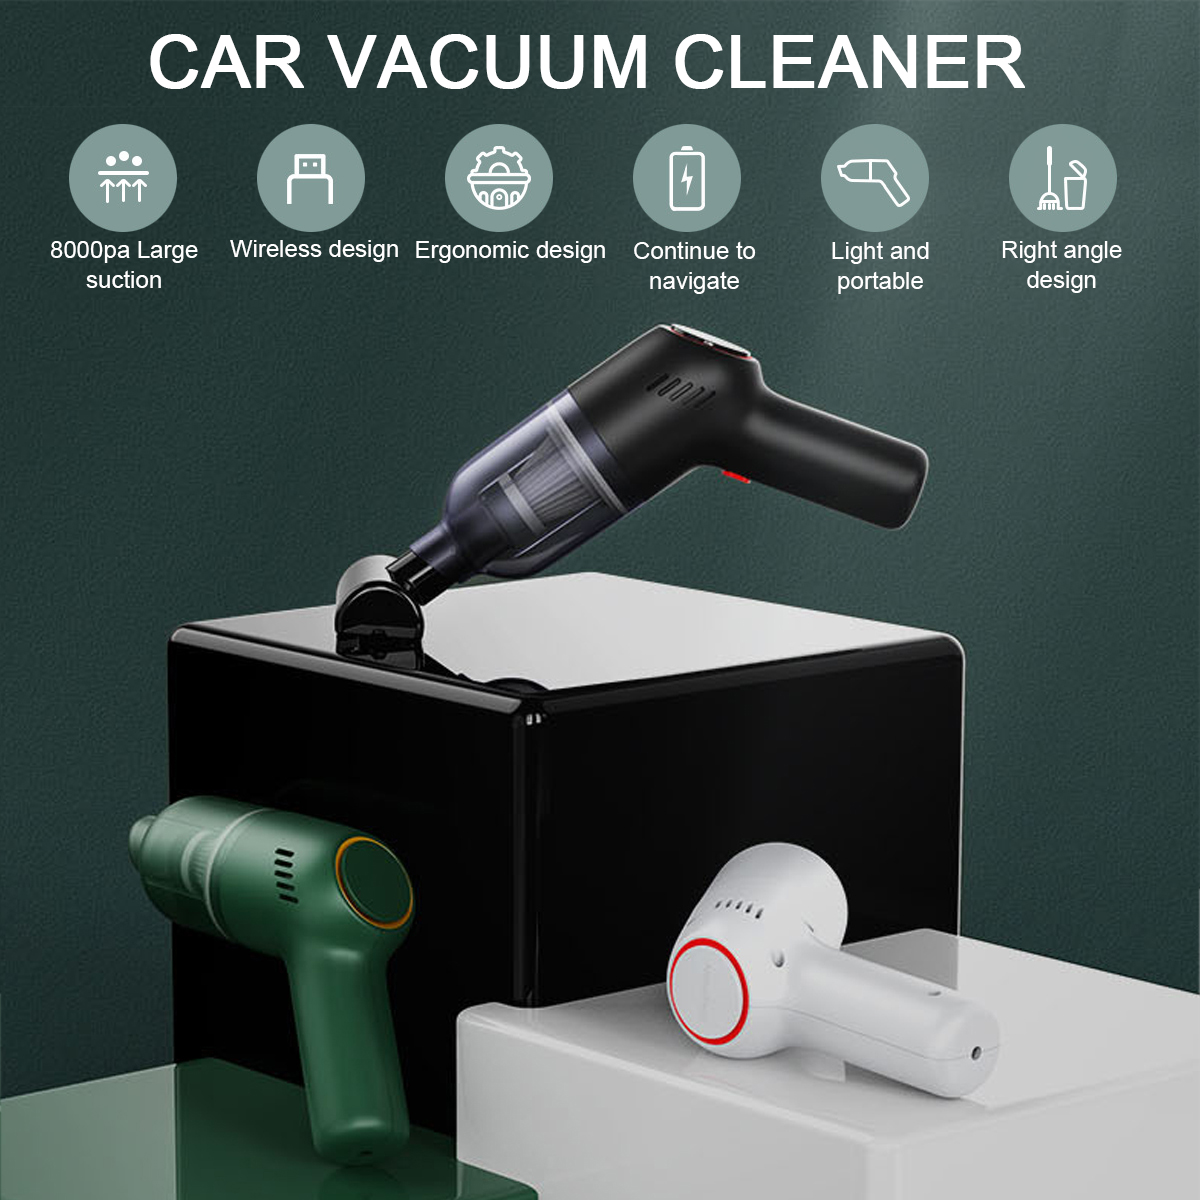 8000Pa-120W-Car-Vacuum-Cleaner-Suction-Cordless-Handheld-USB-Rechargeable-Portable-Car-Household-Vac-1888646-1